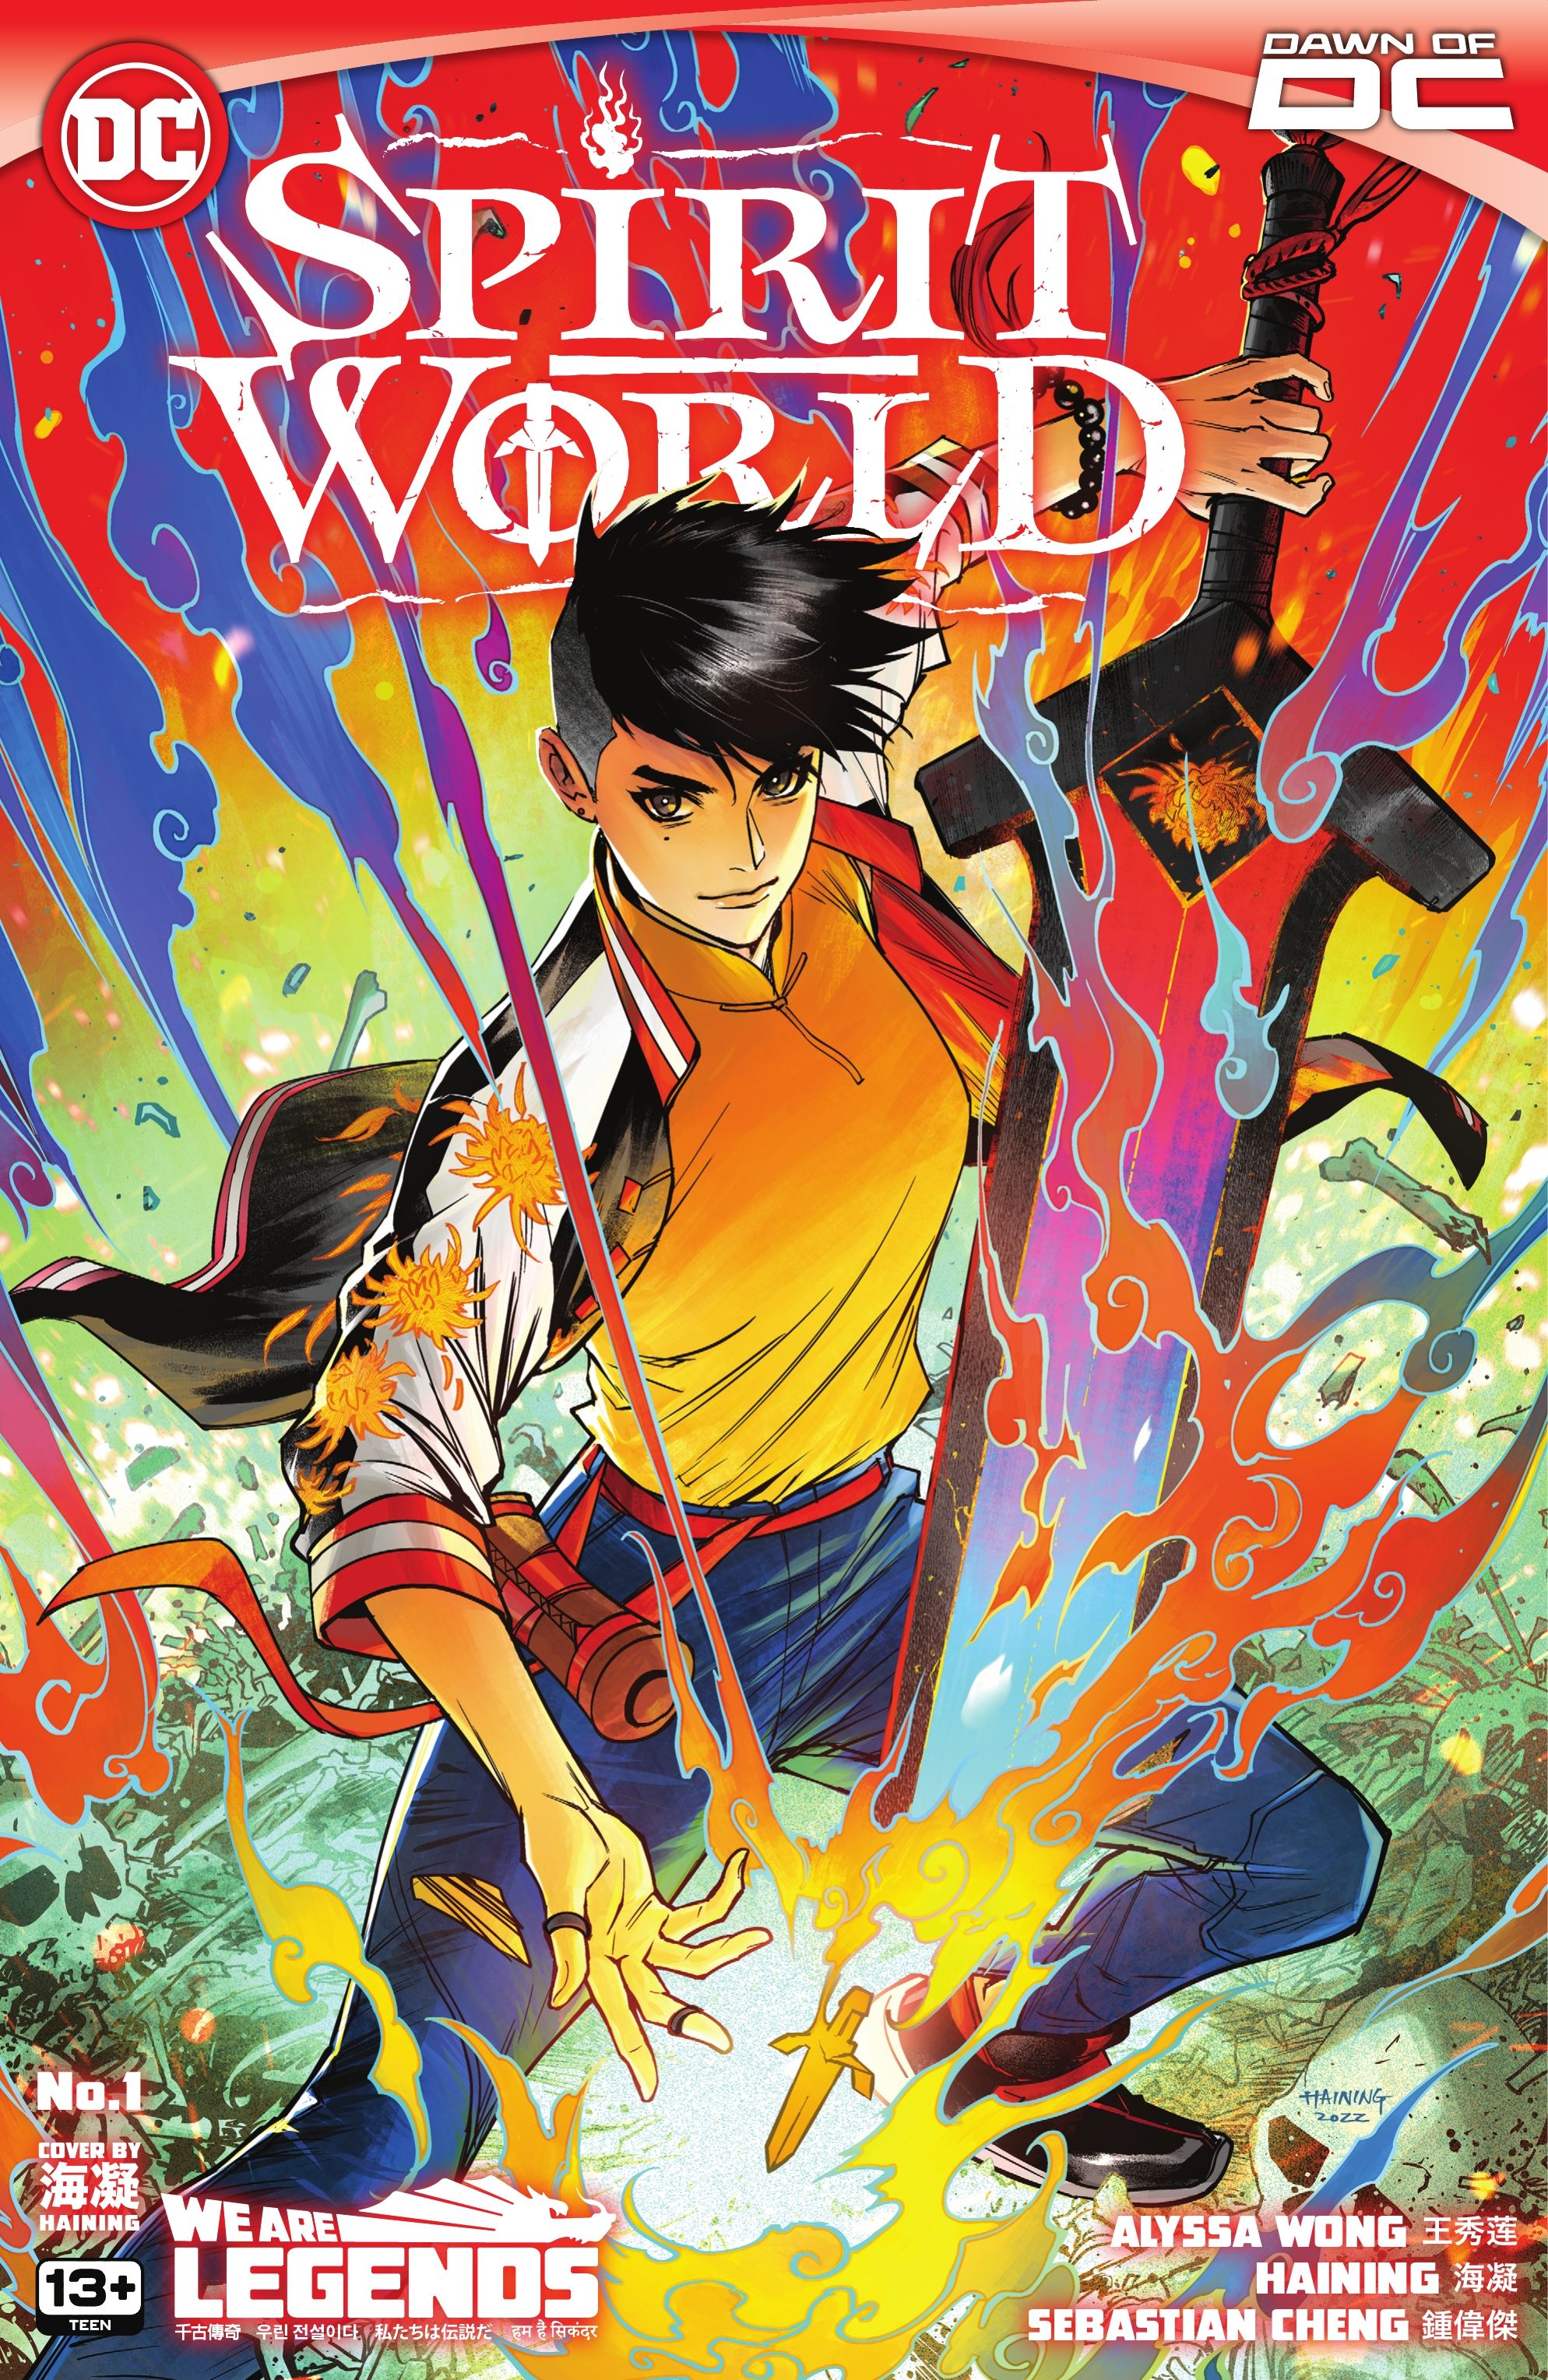  Xanthe Zhou using her powers on the A cover of Spirit World #1